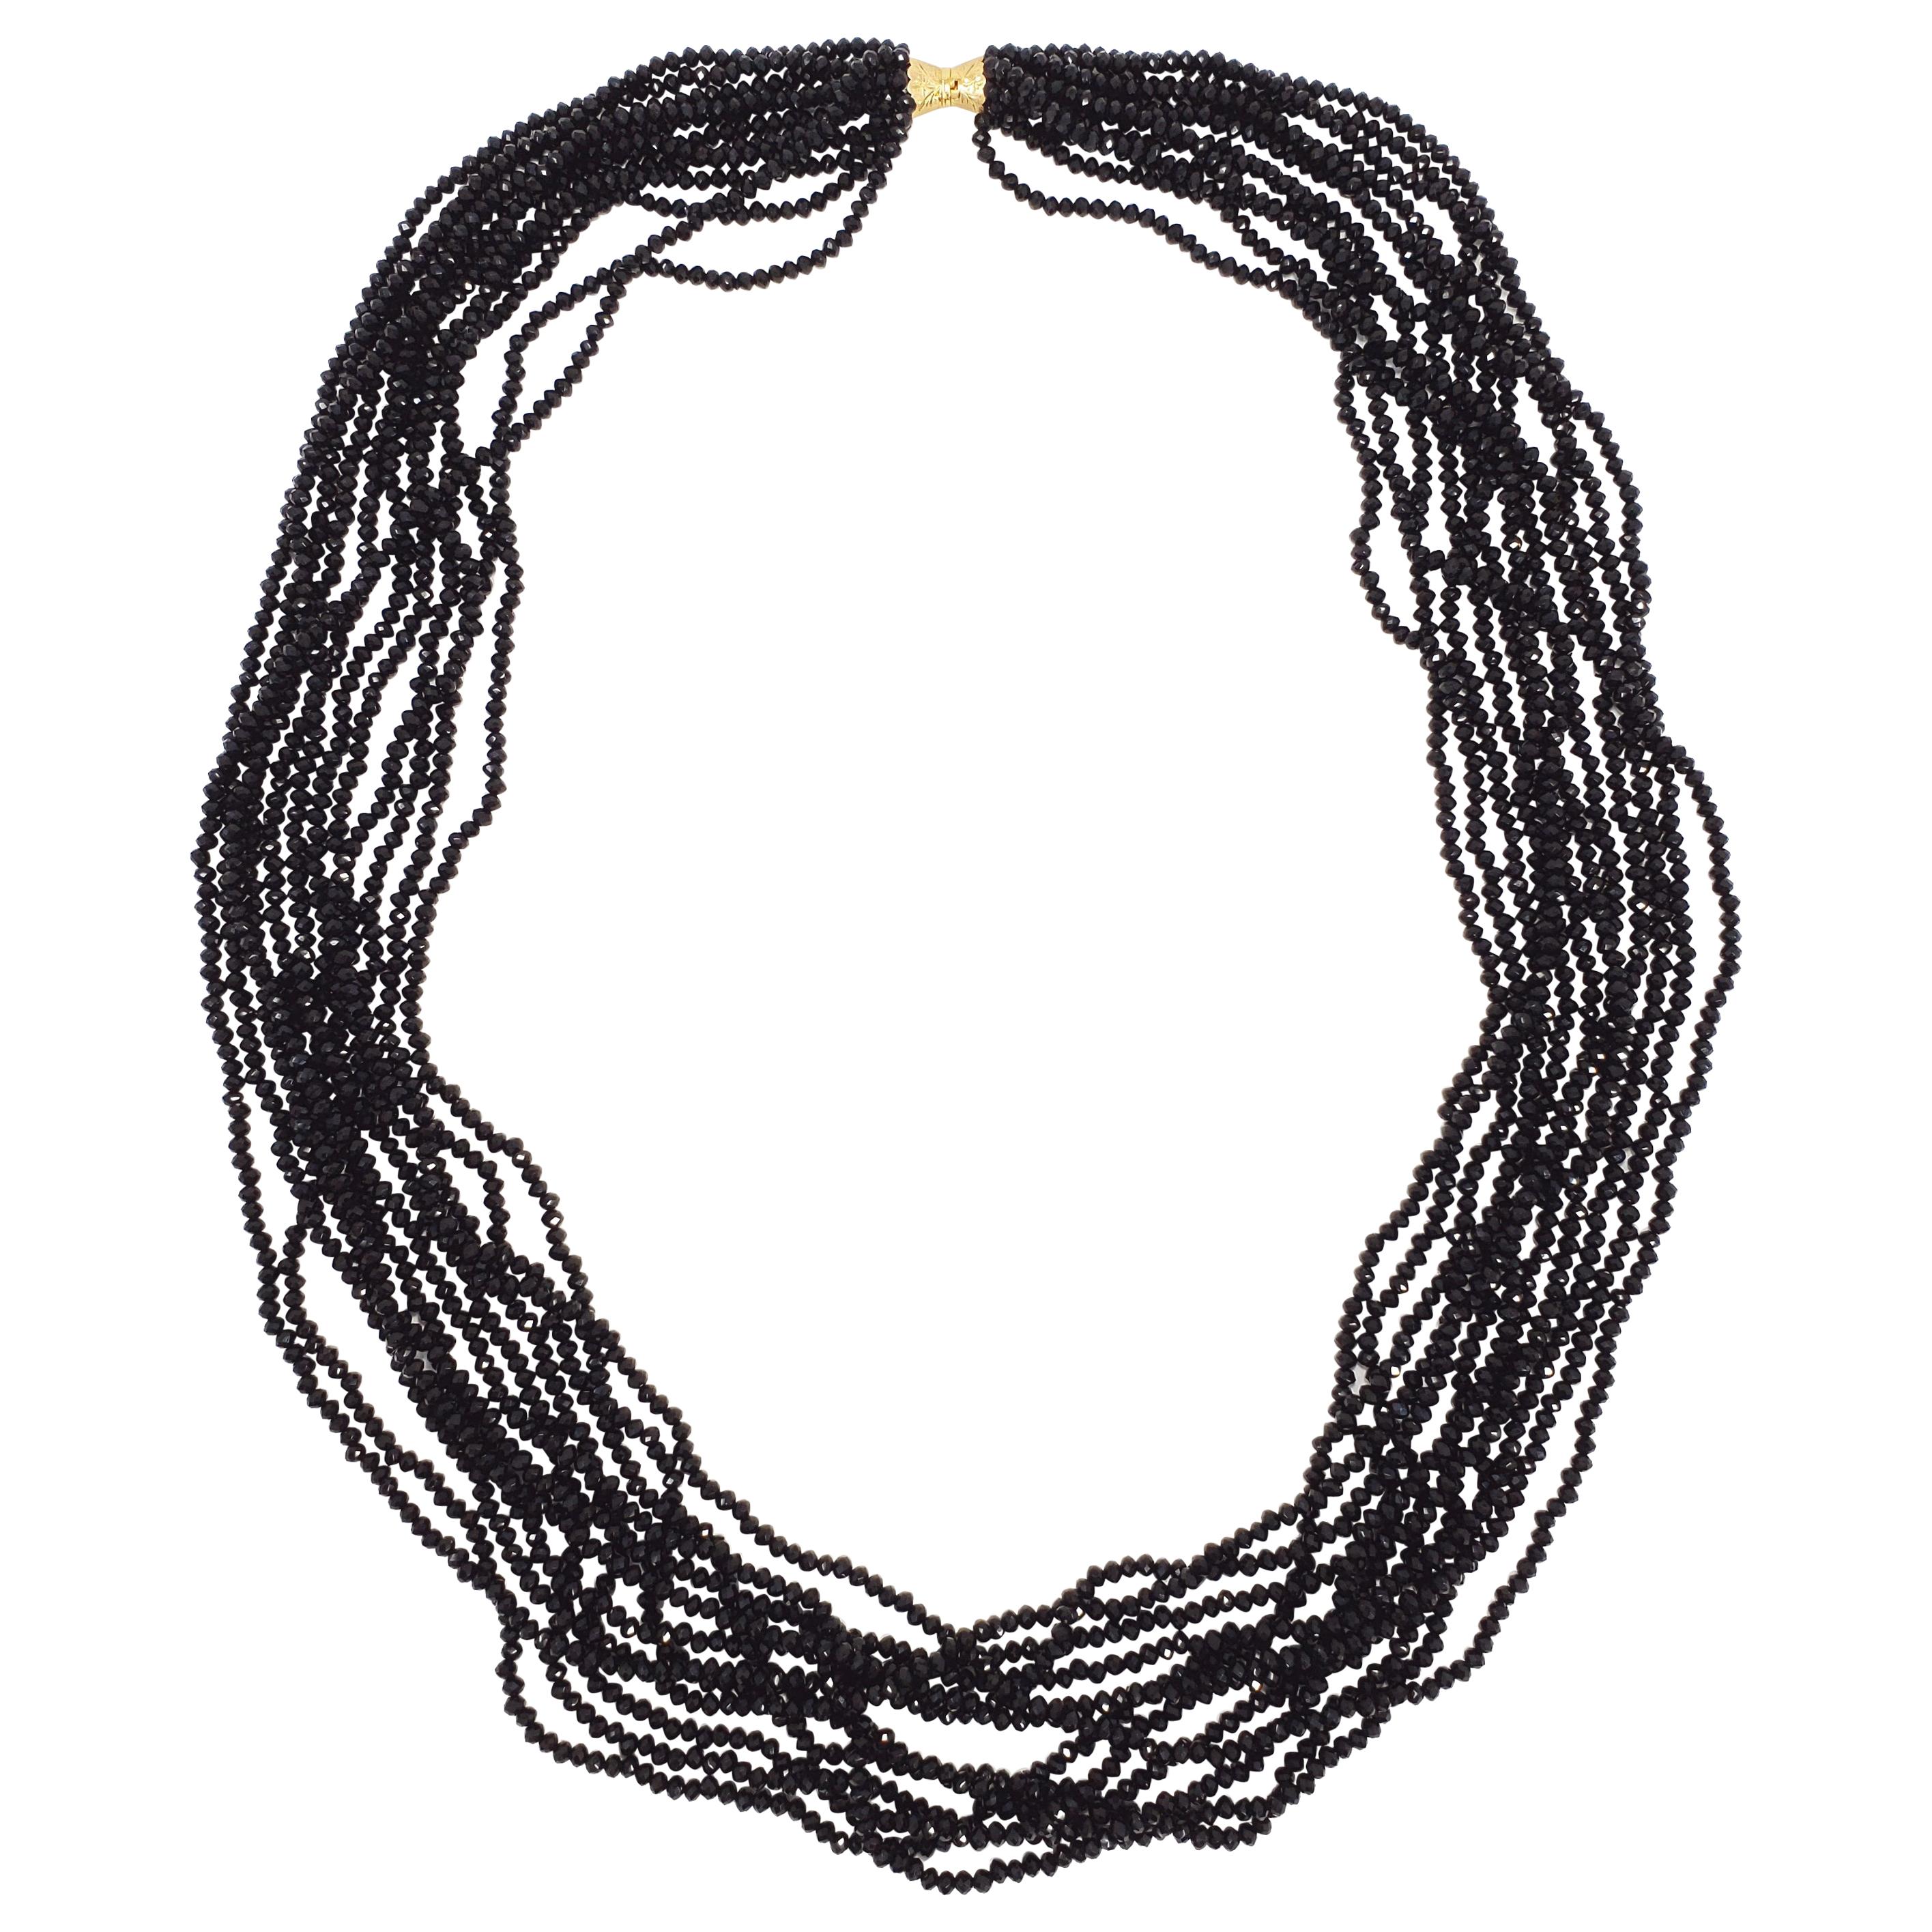 12 Strand Black Spinel Glass Bead Necklace with 14K Yellow Gold Clasp